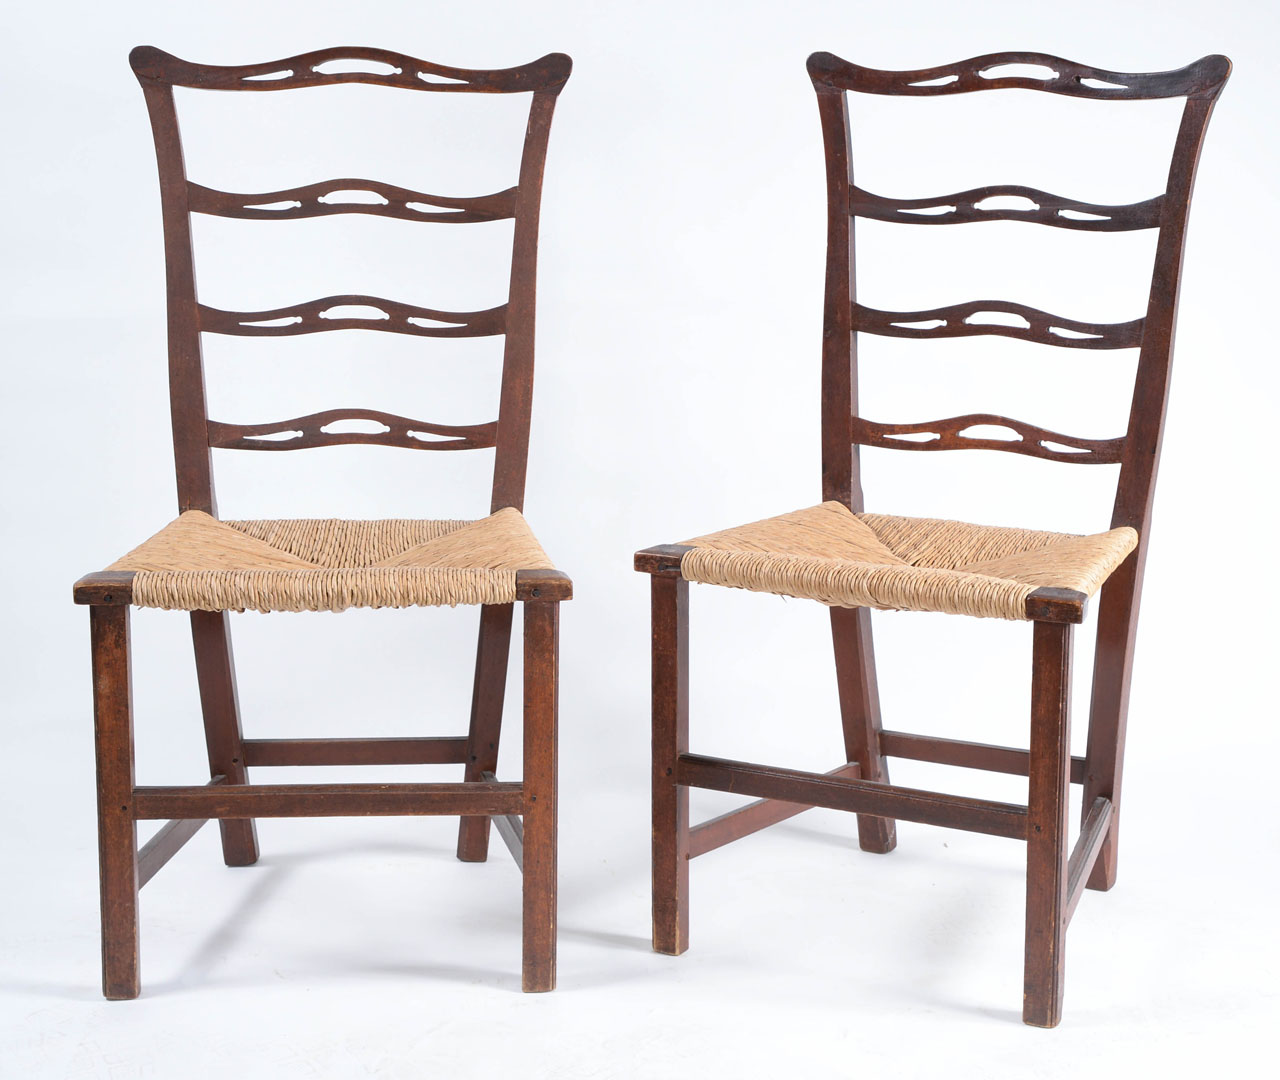 A fine pair of Chippendale 'ribbon-back' chairs.